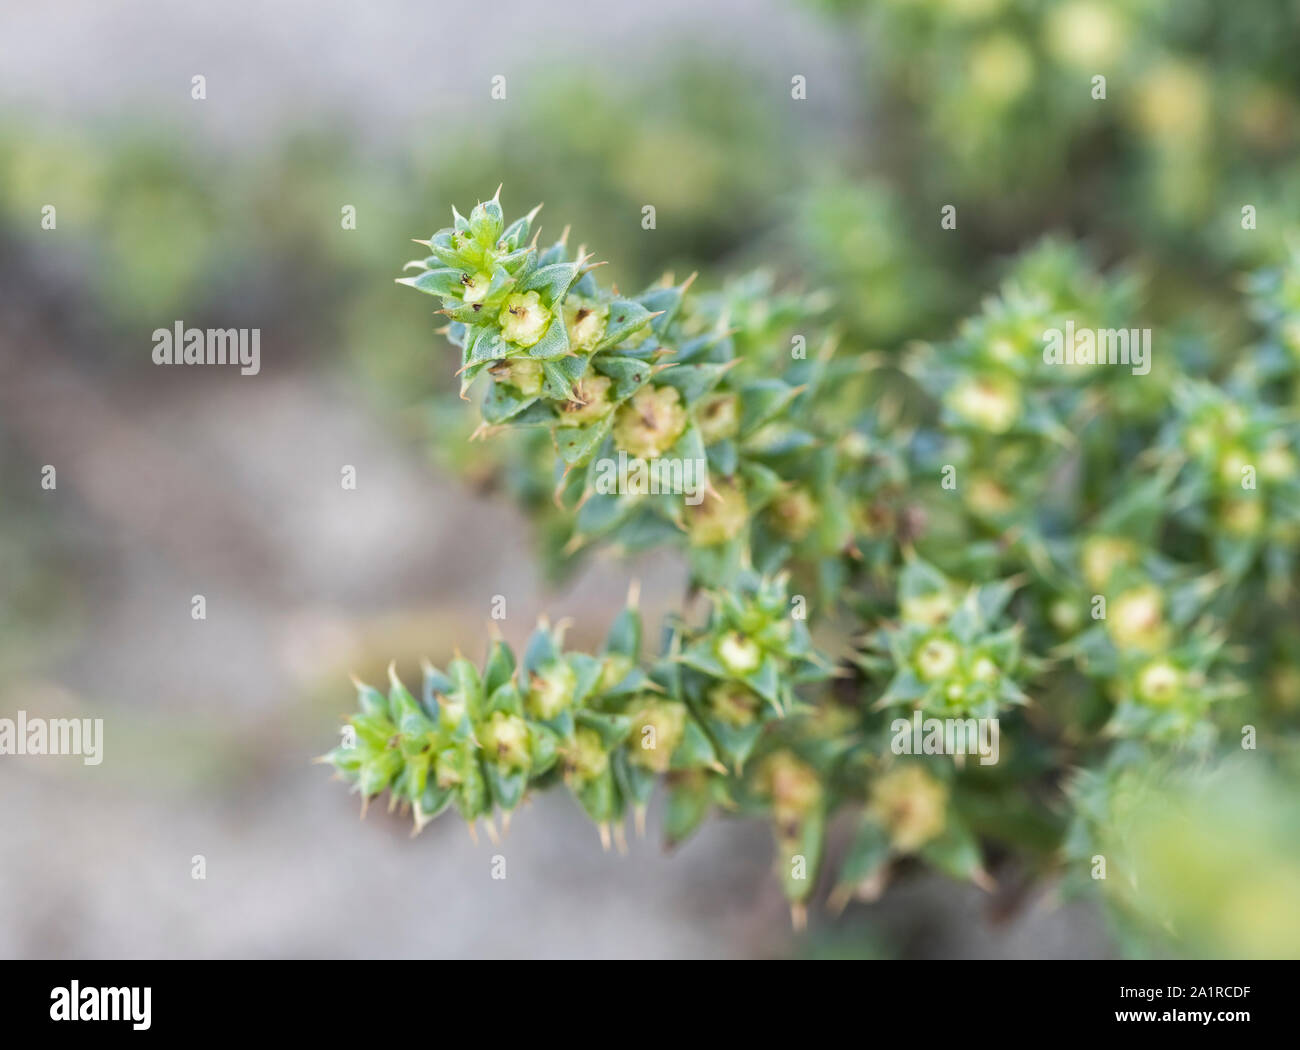 Flowers and autumn (September) foliage / leaves of Prickly Saltwort / Salsola kali on a sandy beach. Once used as a source of soda in glass-making. Stock Photo